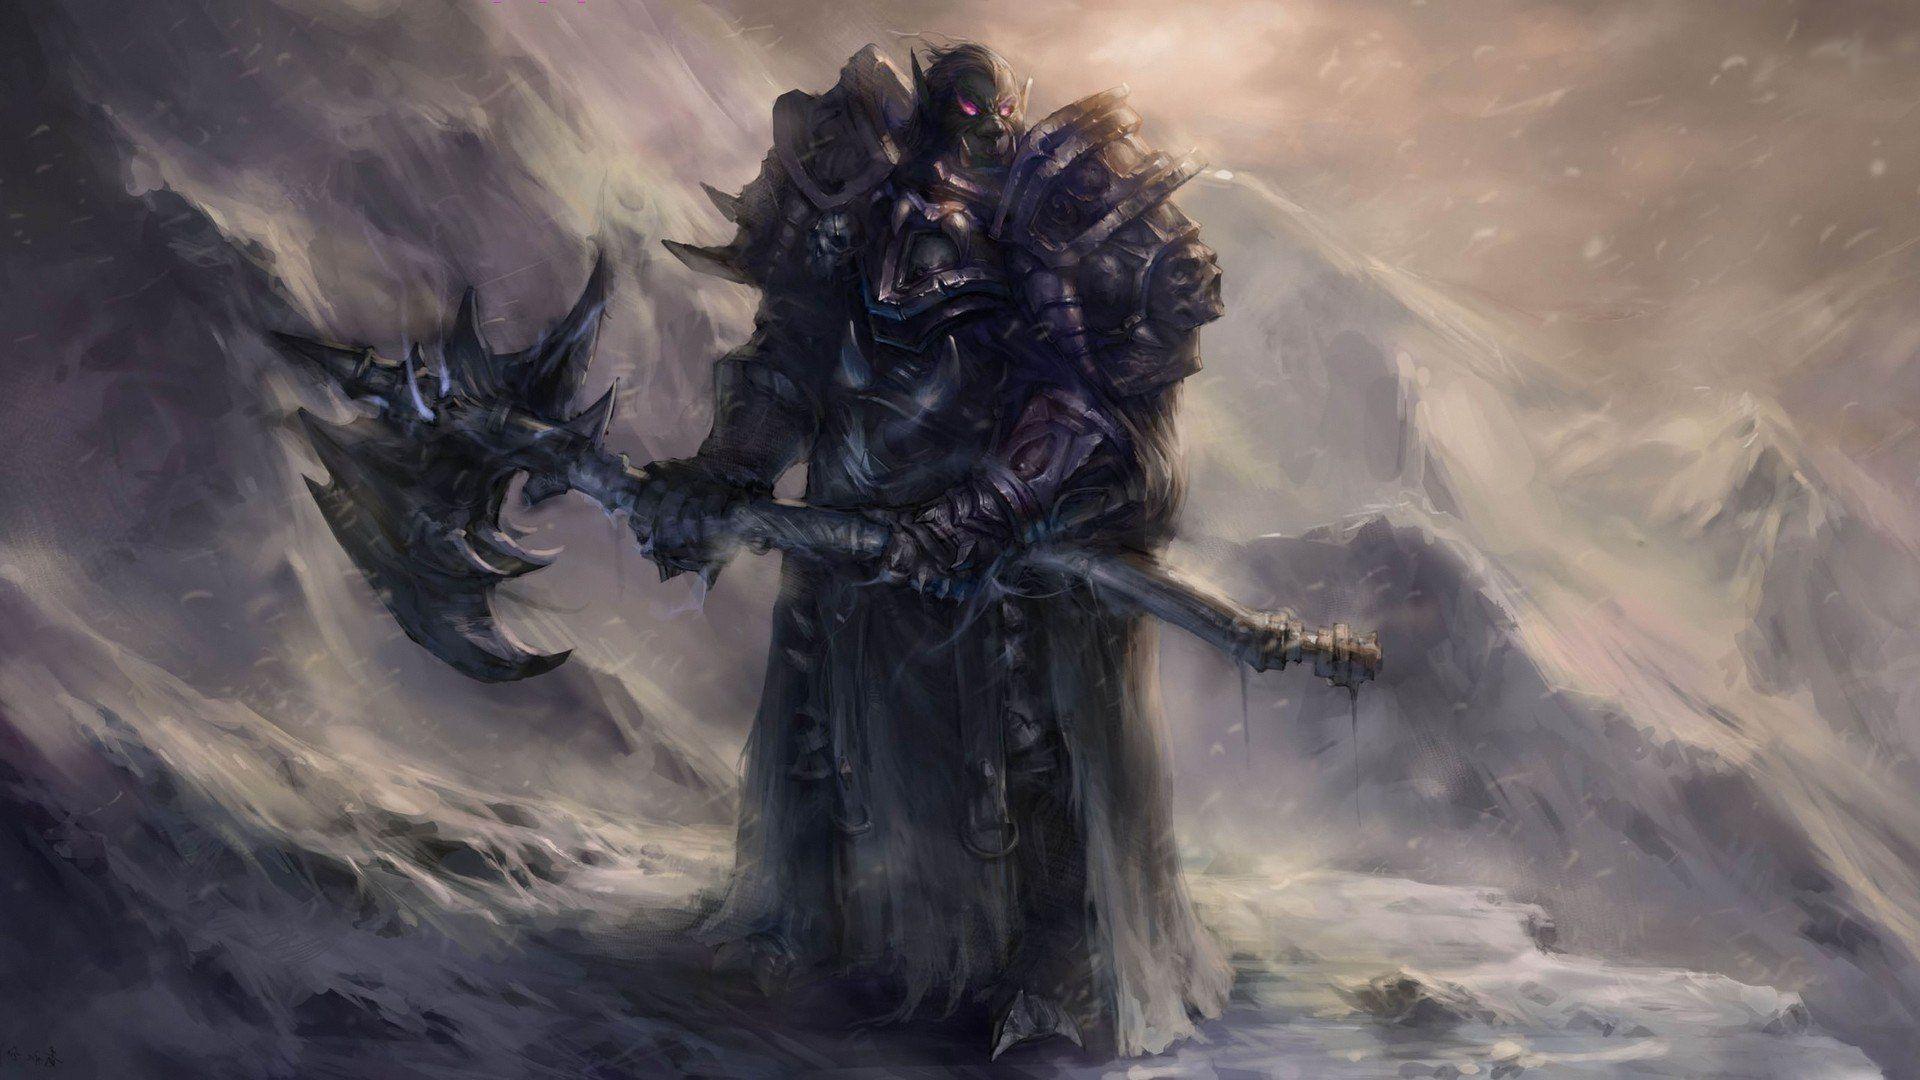 FUGG YEAH DEATH KNIGHTS ooh... wrong D&D have a wallpapers